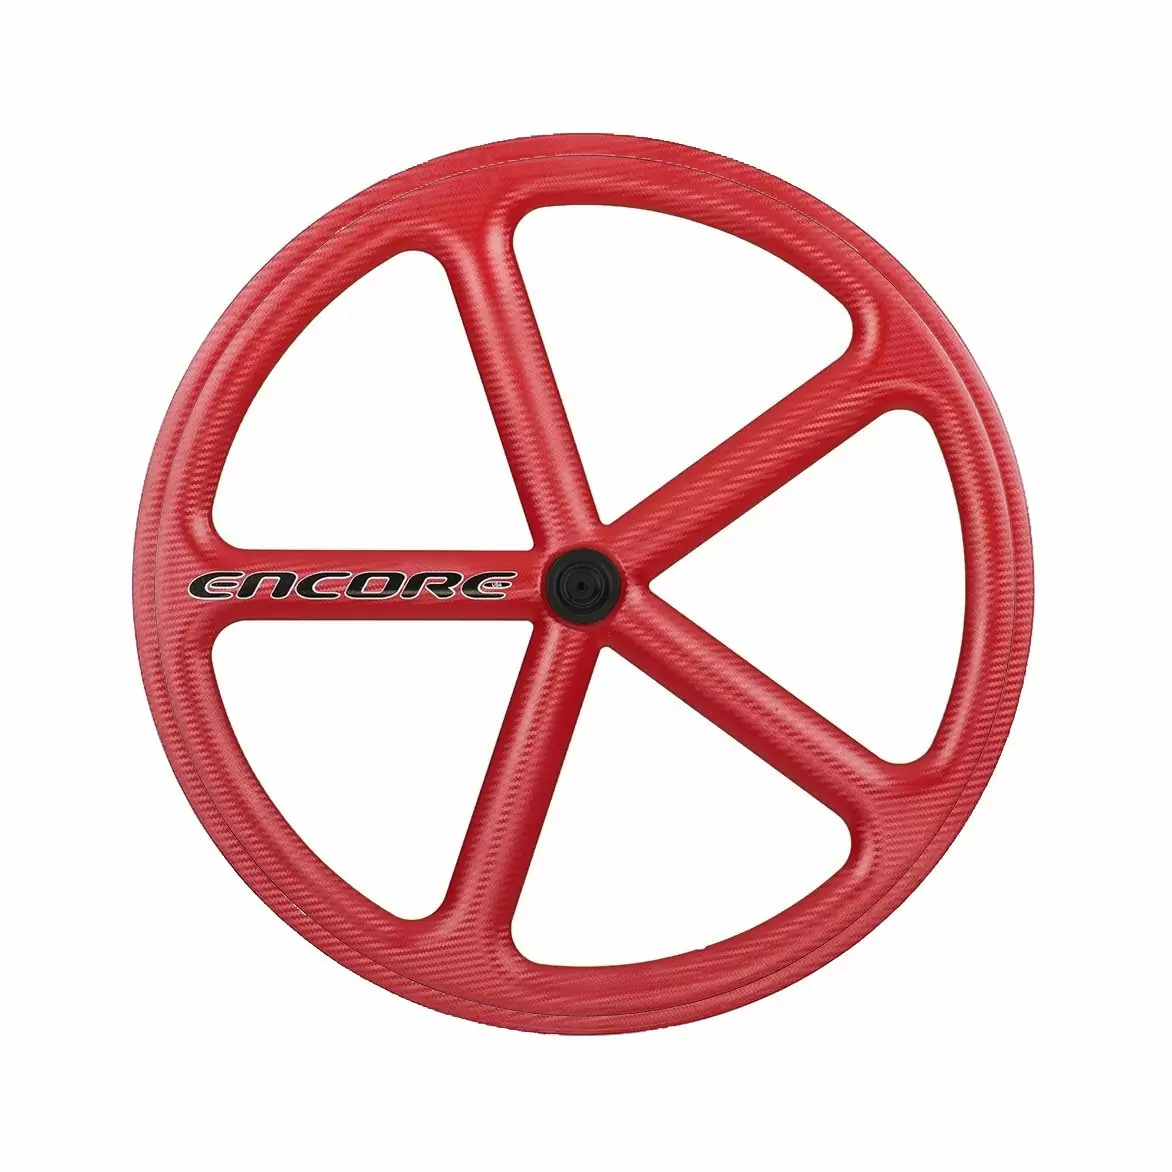 front wheel 700c track 5 spokes carbon weave red nmsw - image